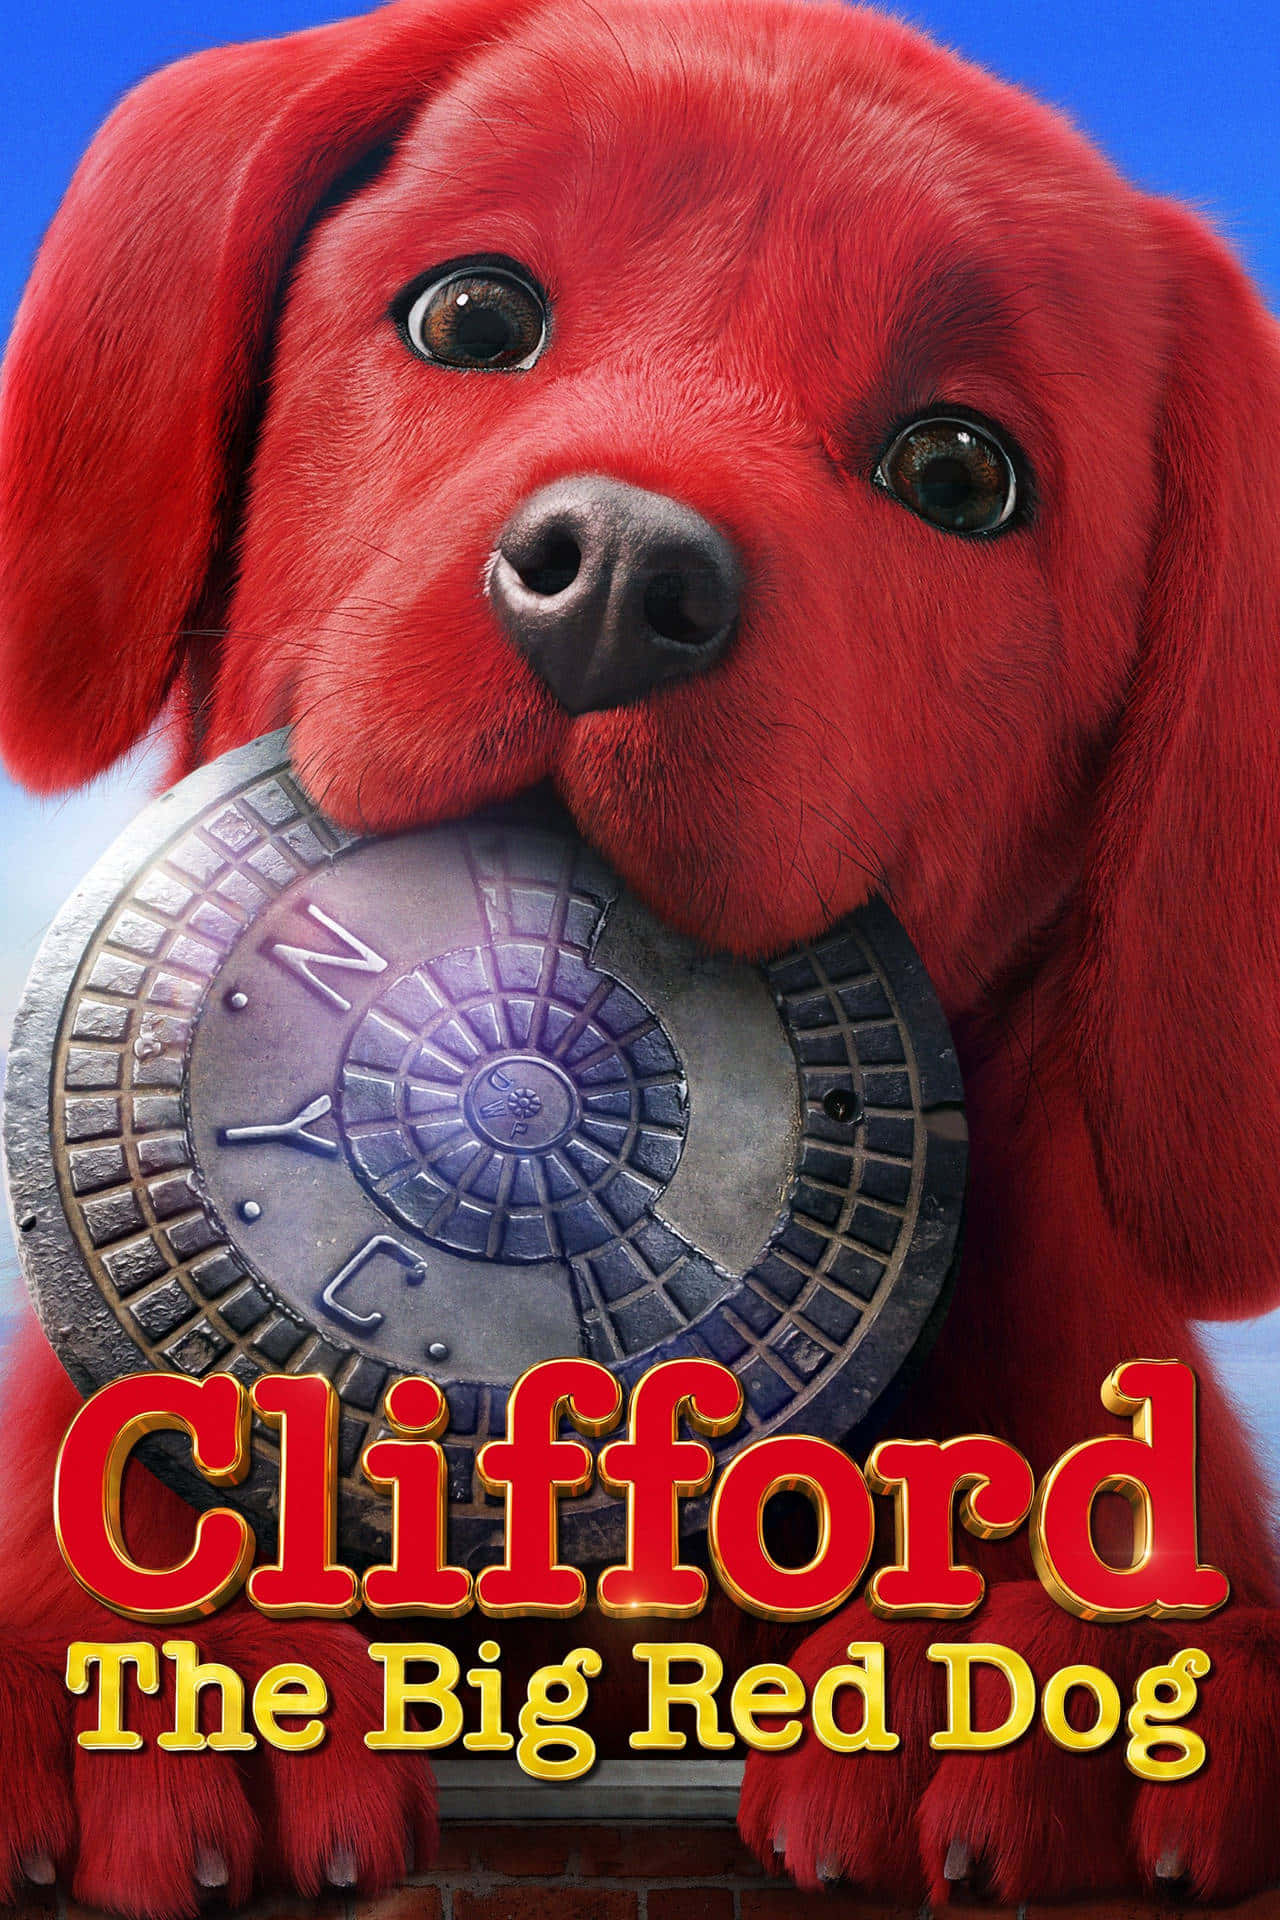 lovable Clifford the Big Red Dog bringing smiles everywhere